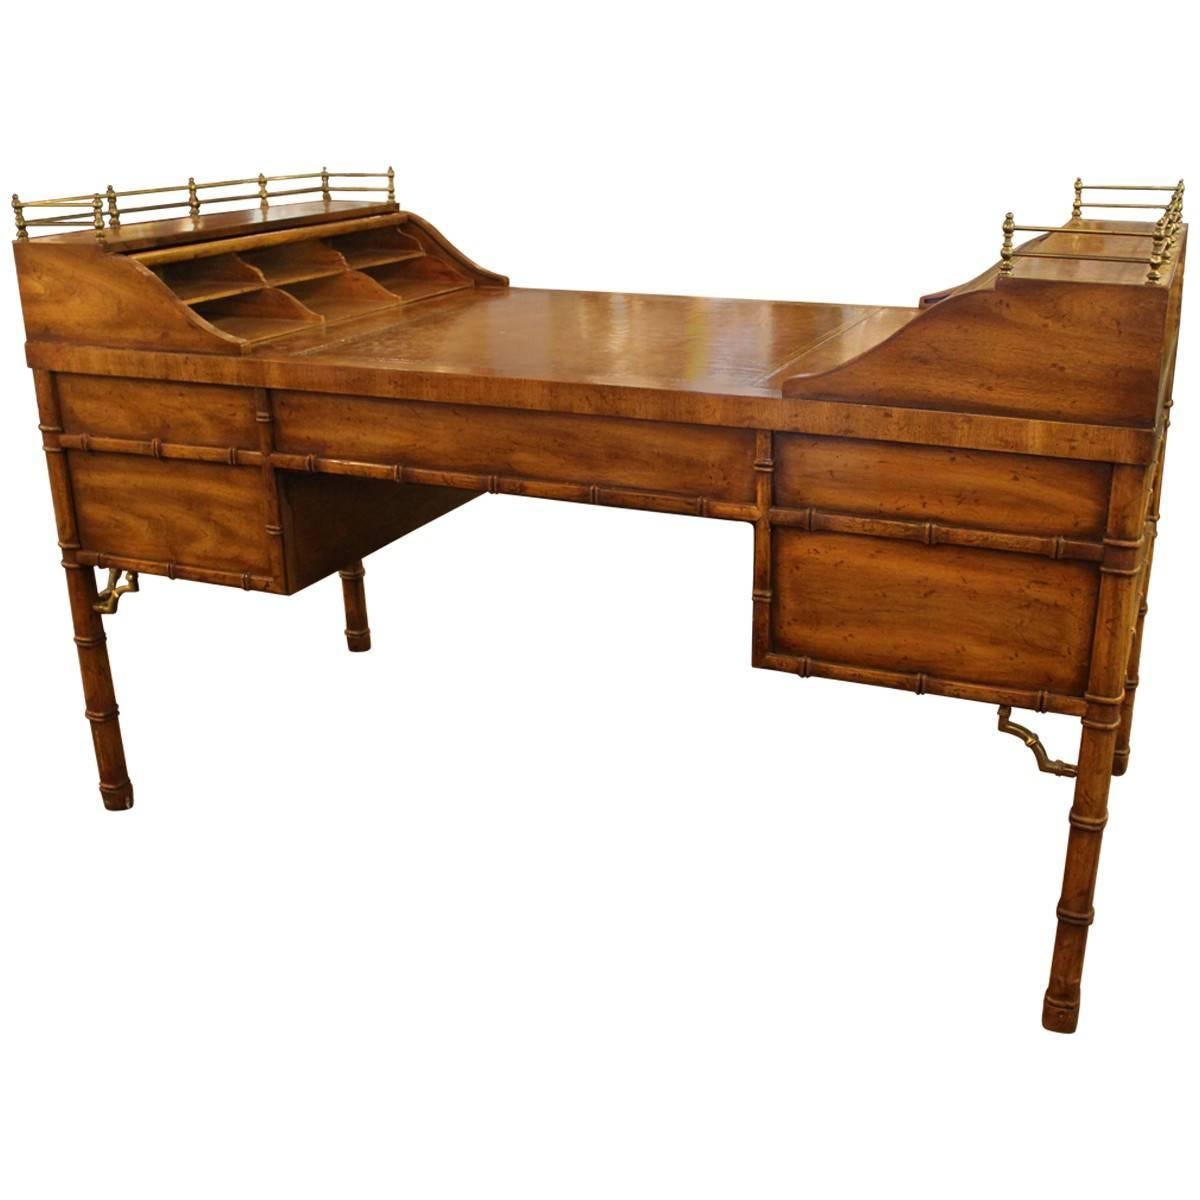 This amazing untouched desk made by Drexel Heritage is a George Washington style desk featuring a tooled leather writing surface and ample storage space for all necessities. Great George Washington style faux bamboo and brass desk with tooled